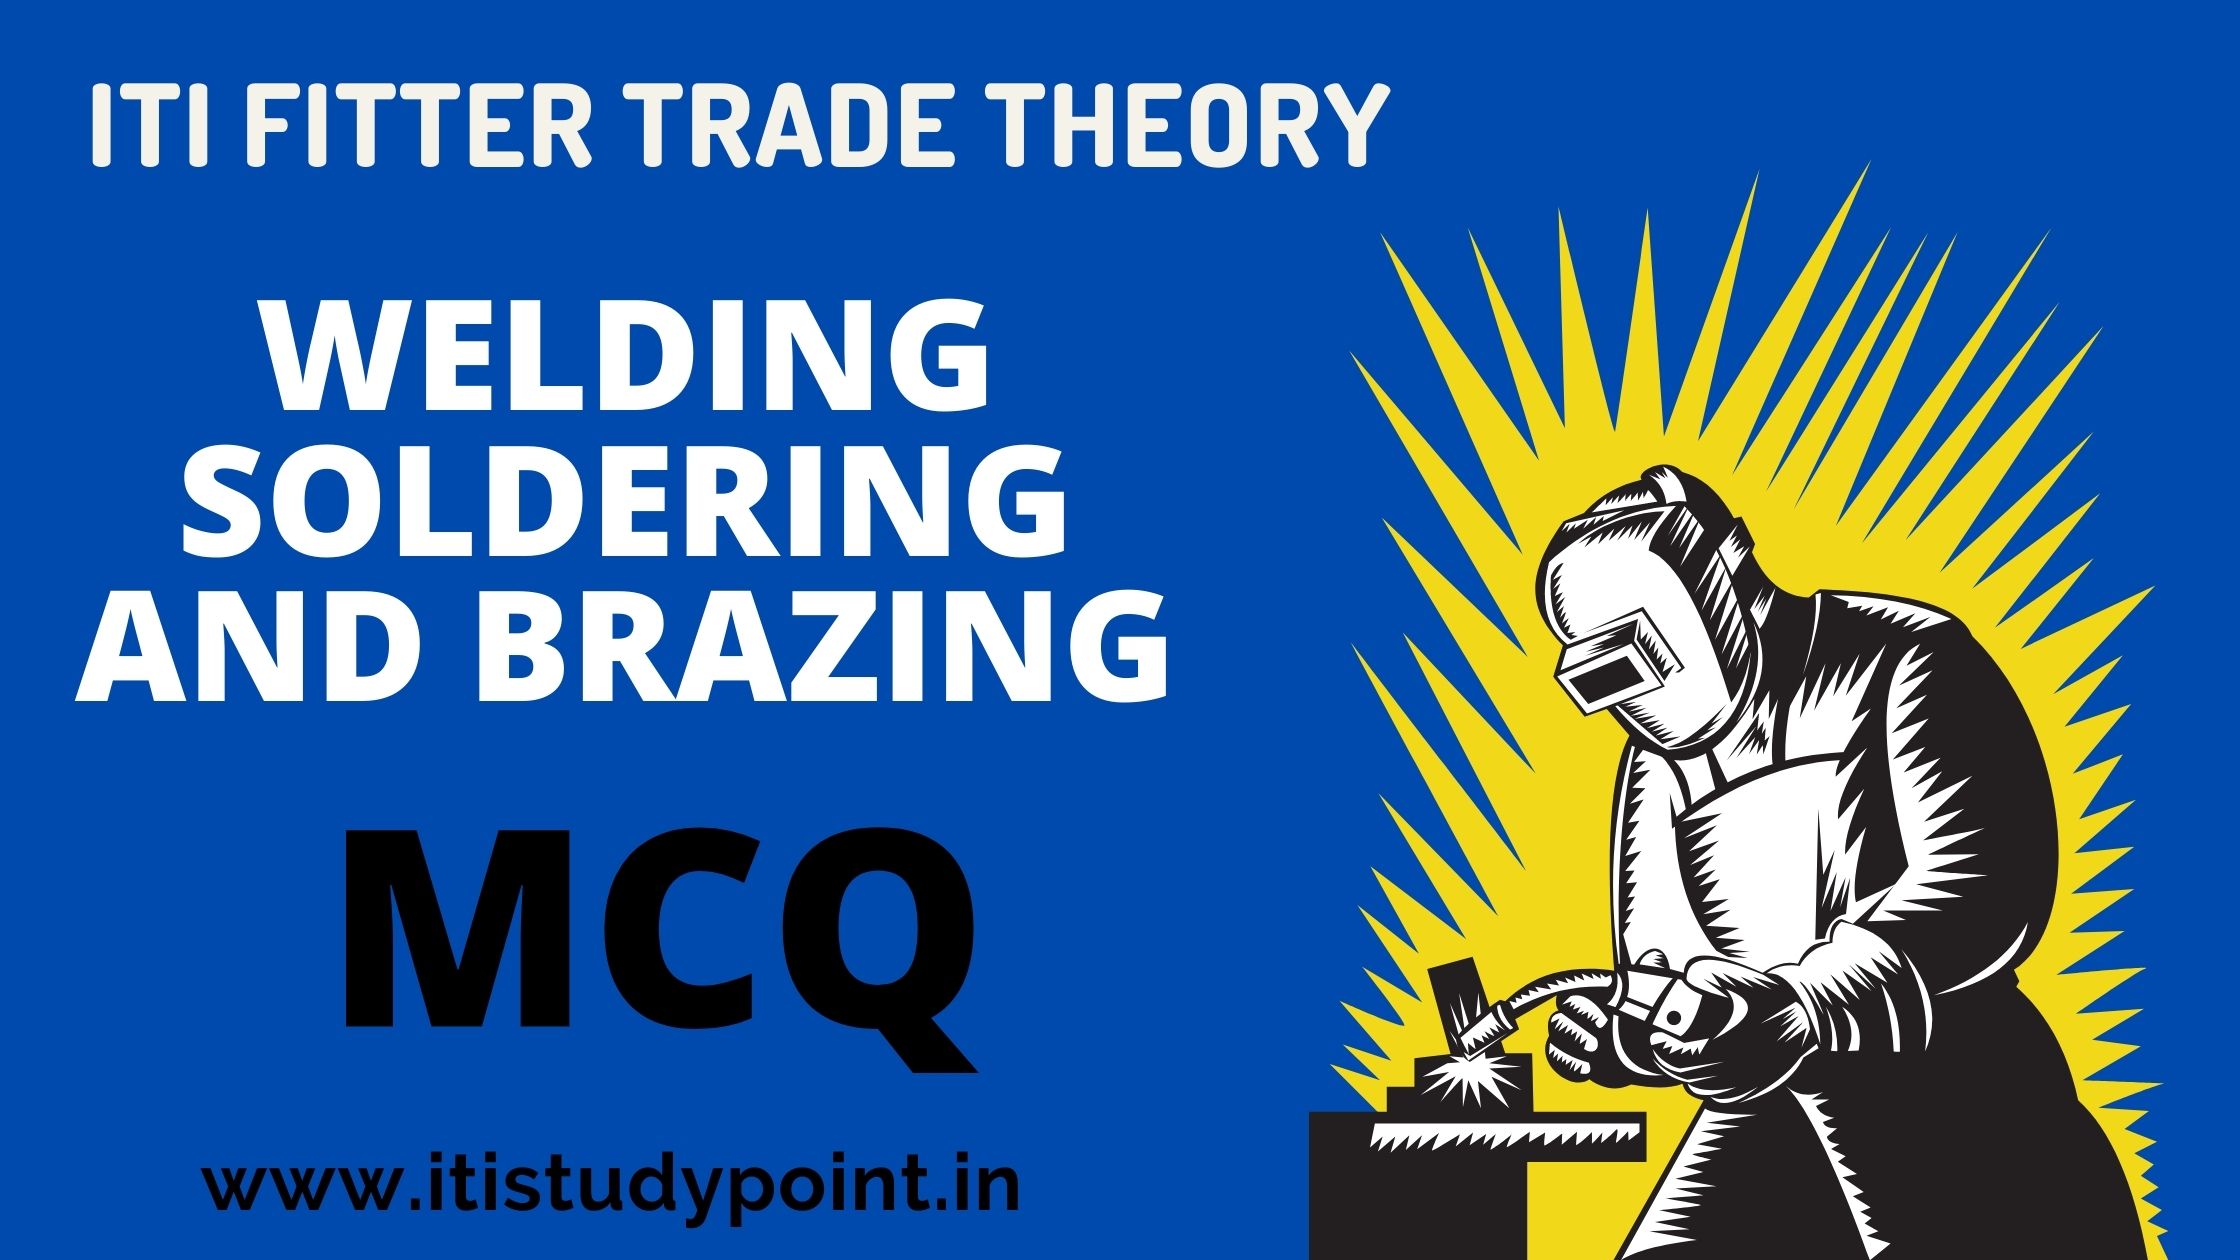 WELDING SOLDERING AND BRAZING MCQ 1